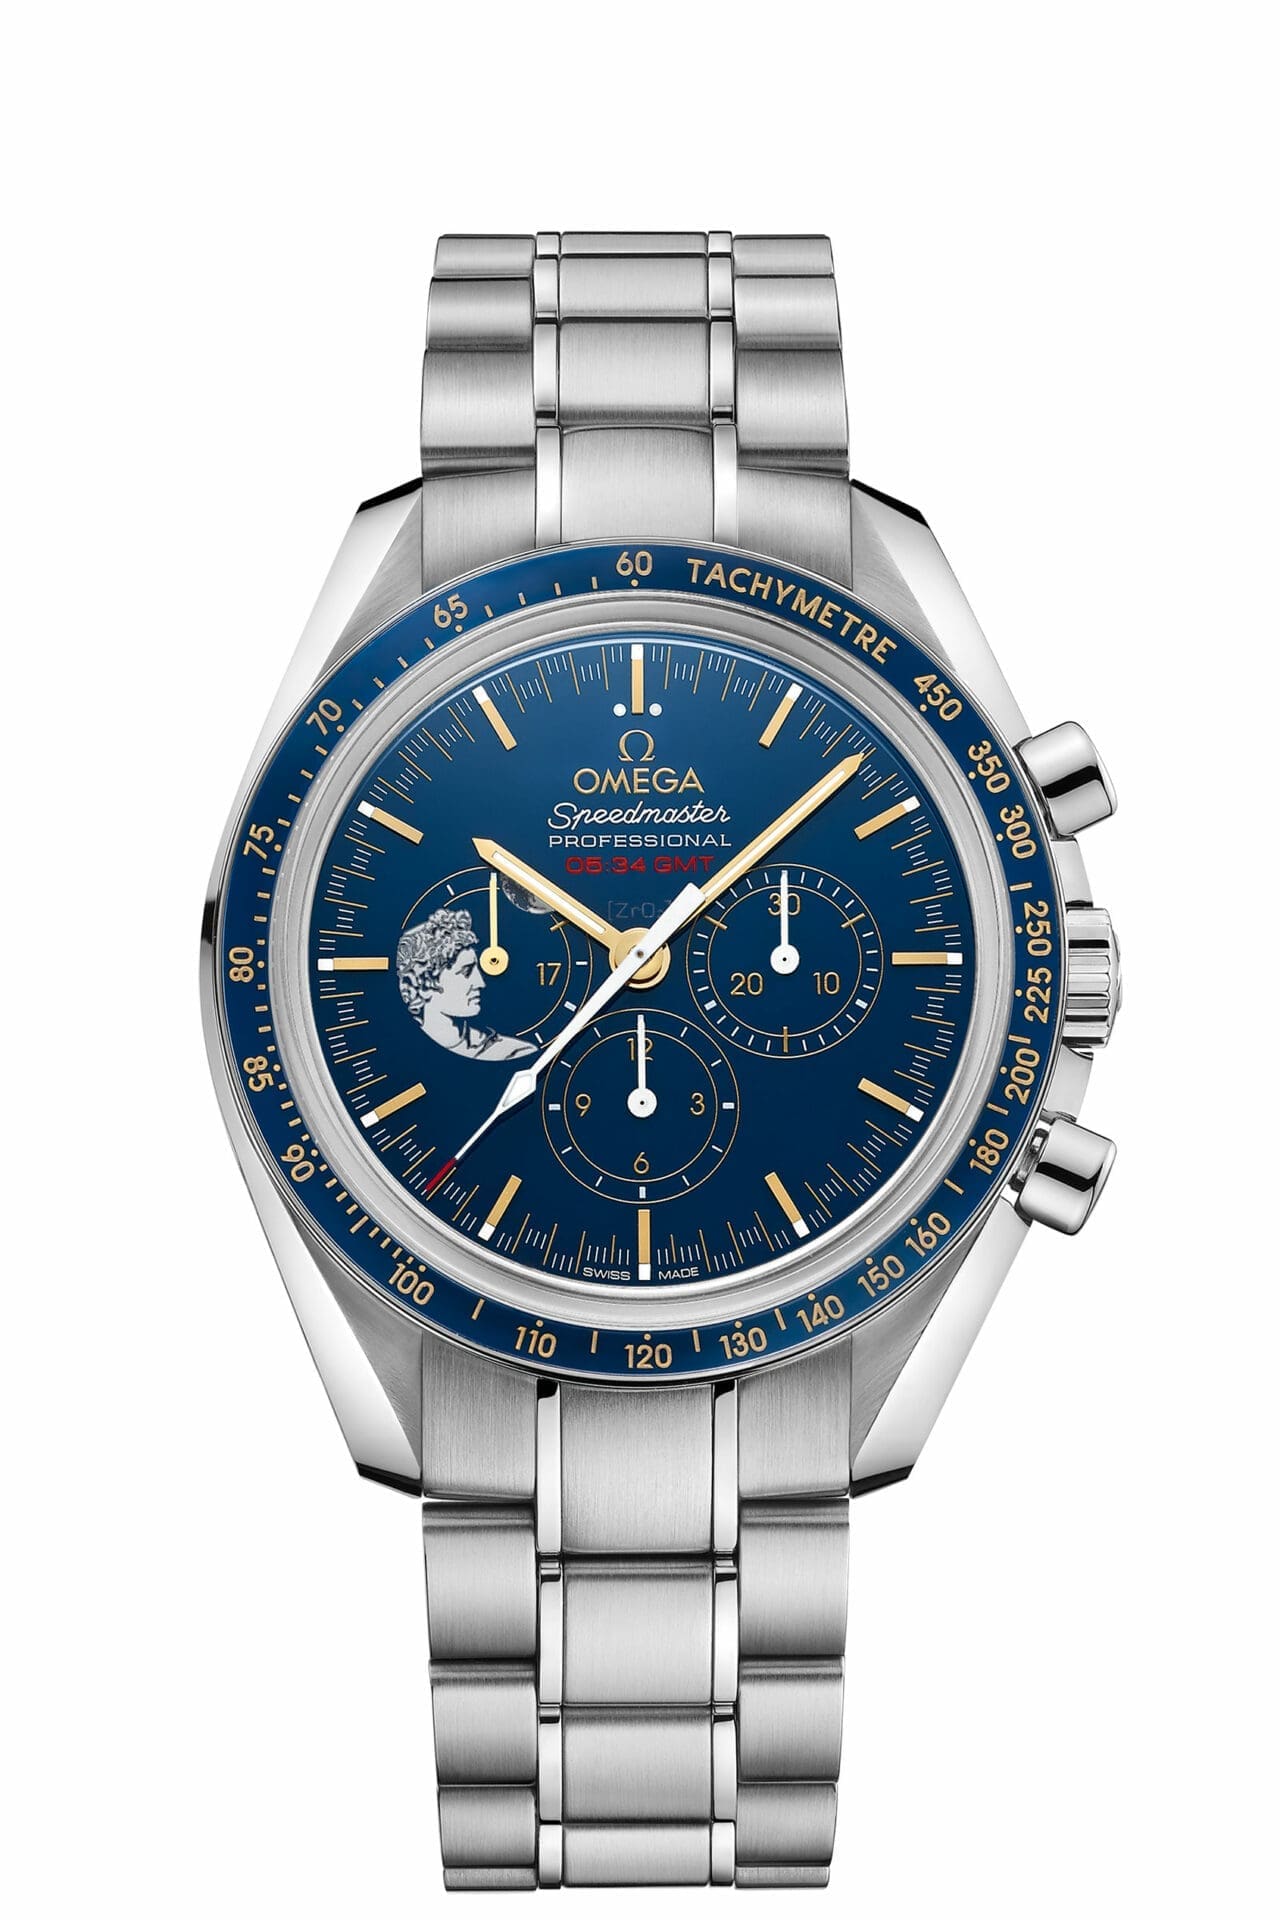 BREAKING: The Speedmaster “Apollo XVII” Limited Edition released at Baselworld 2017